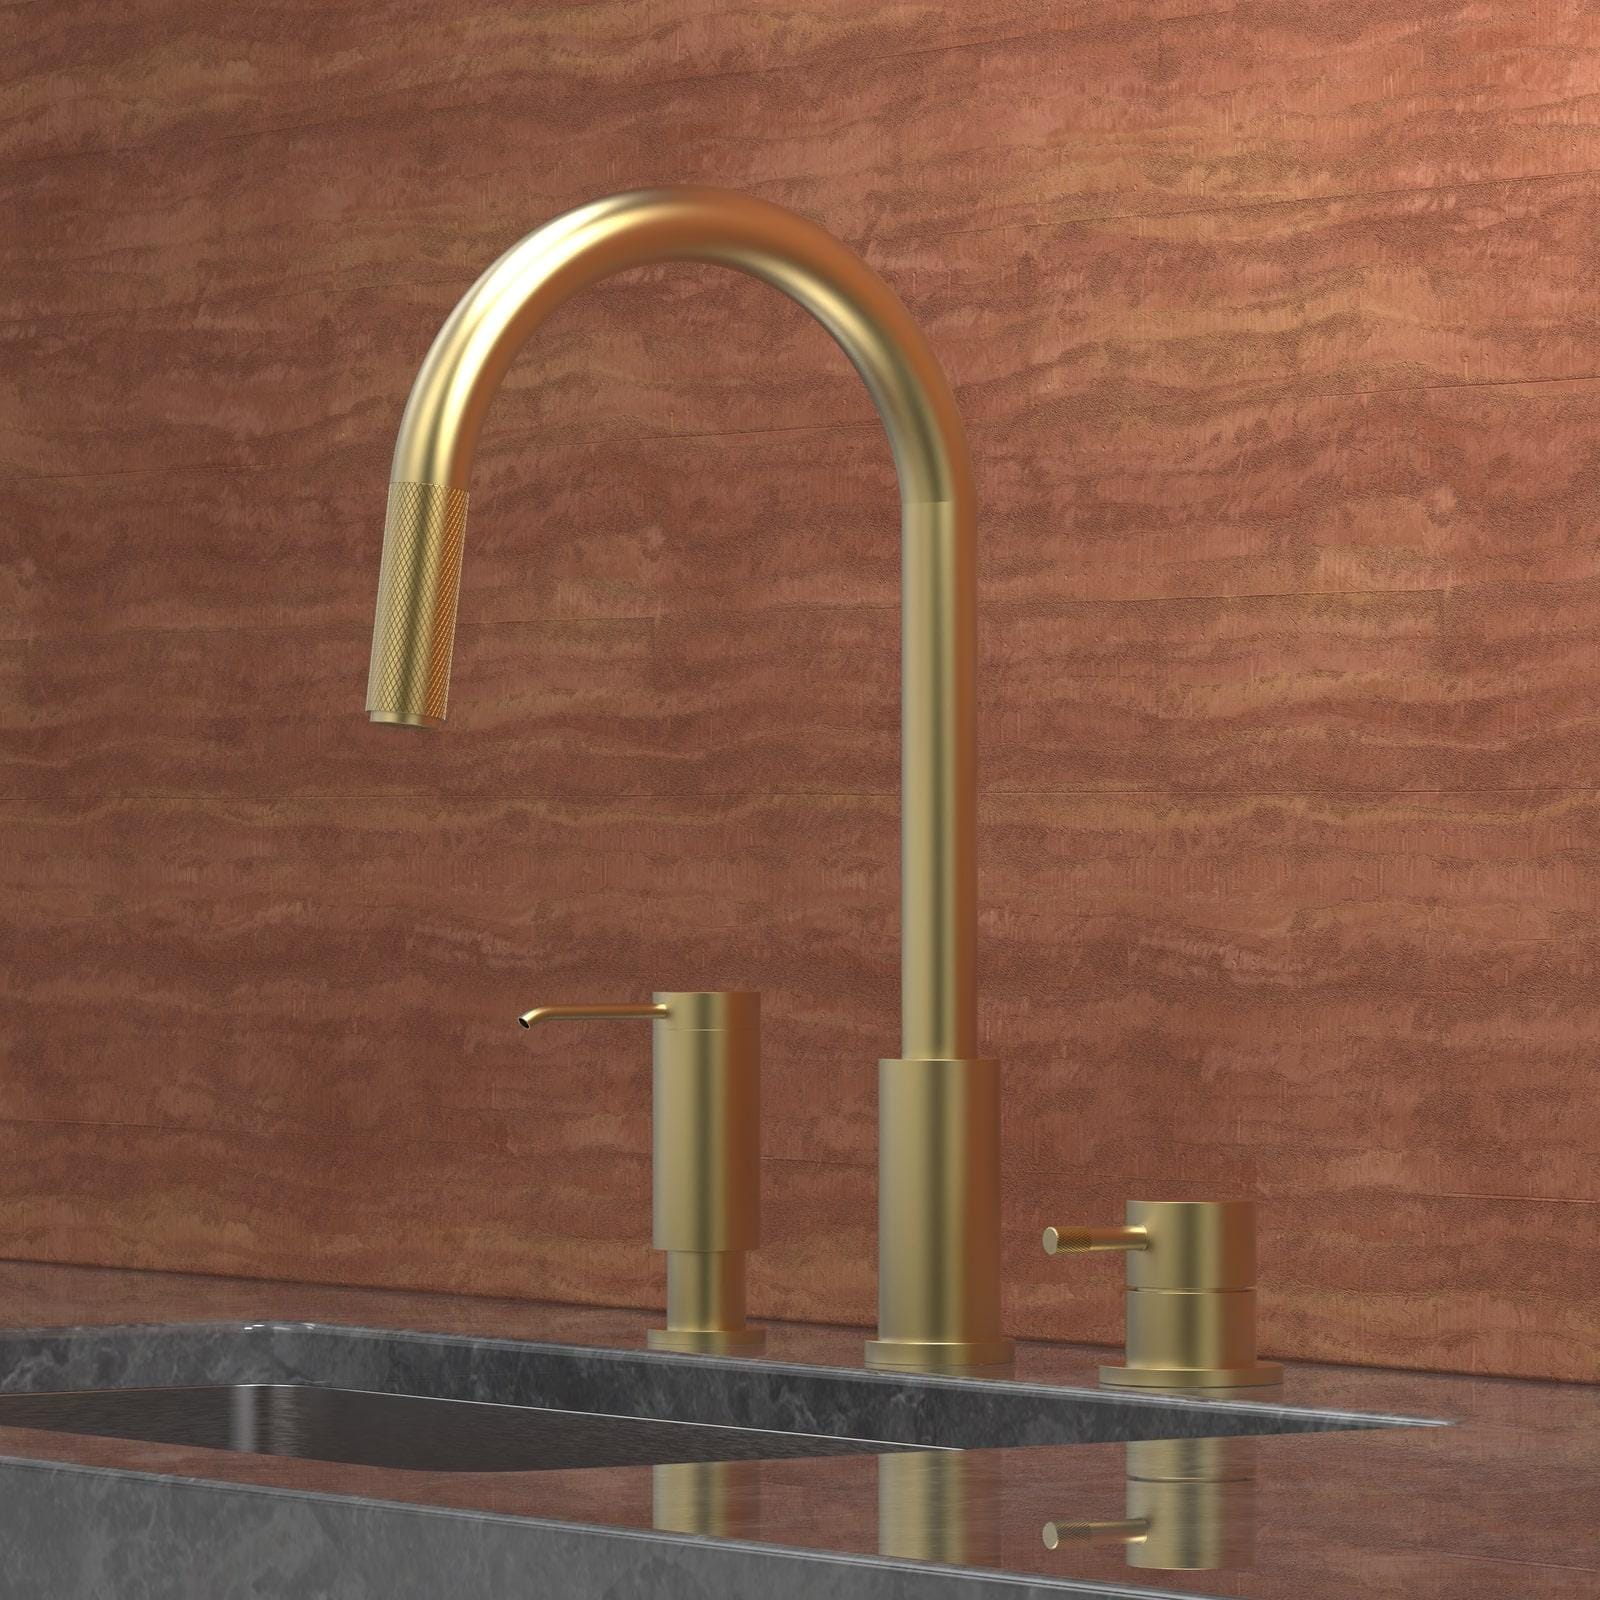 A render of Par Taps mixer and hob set in brass with a rendered wall behind